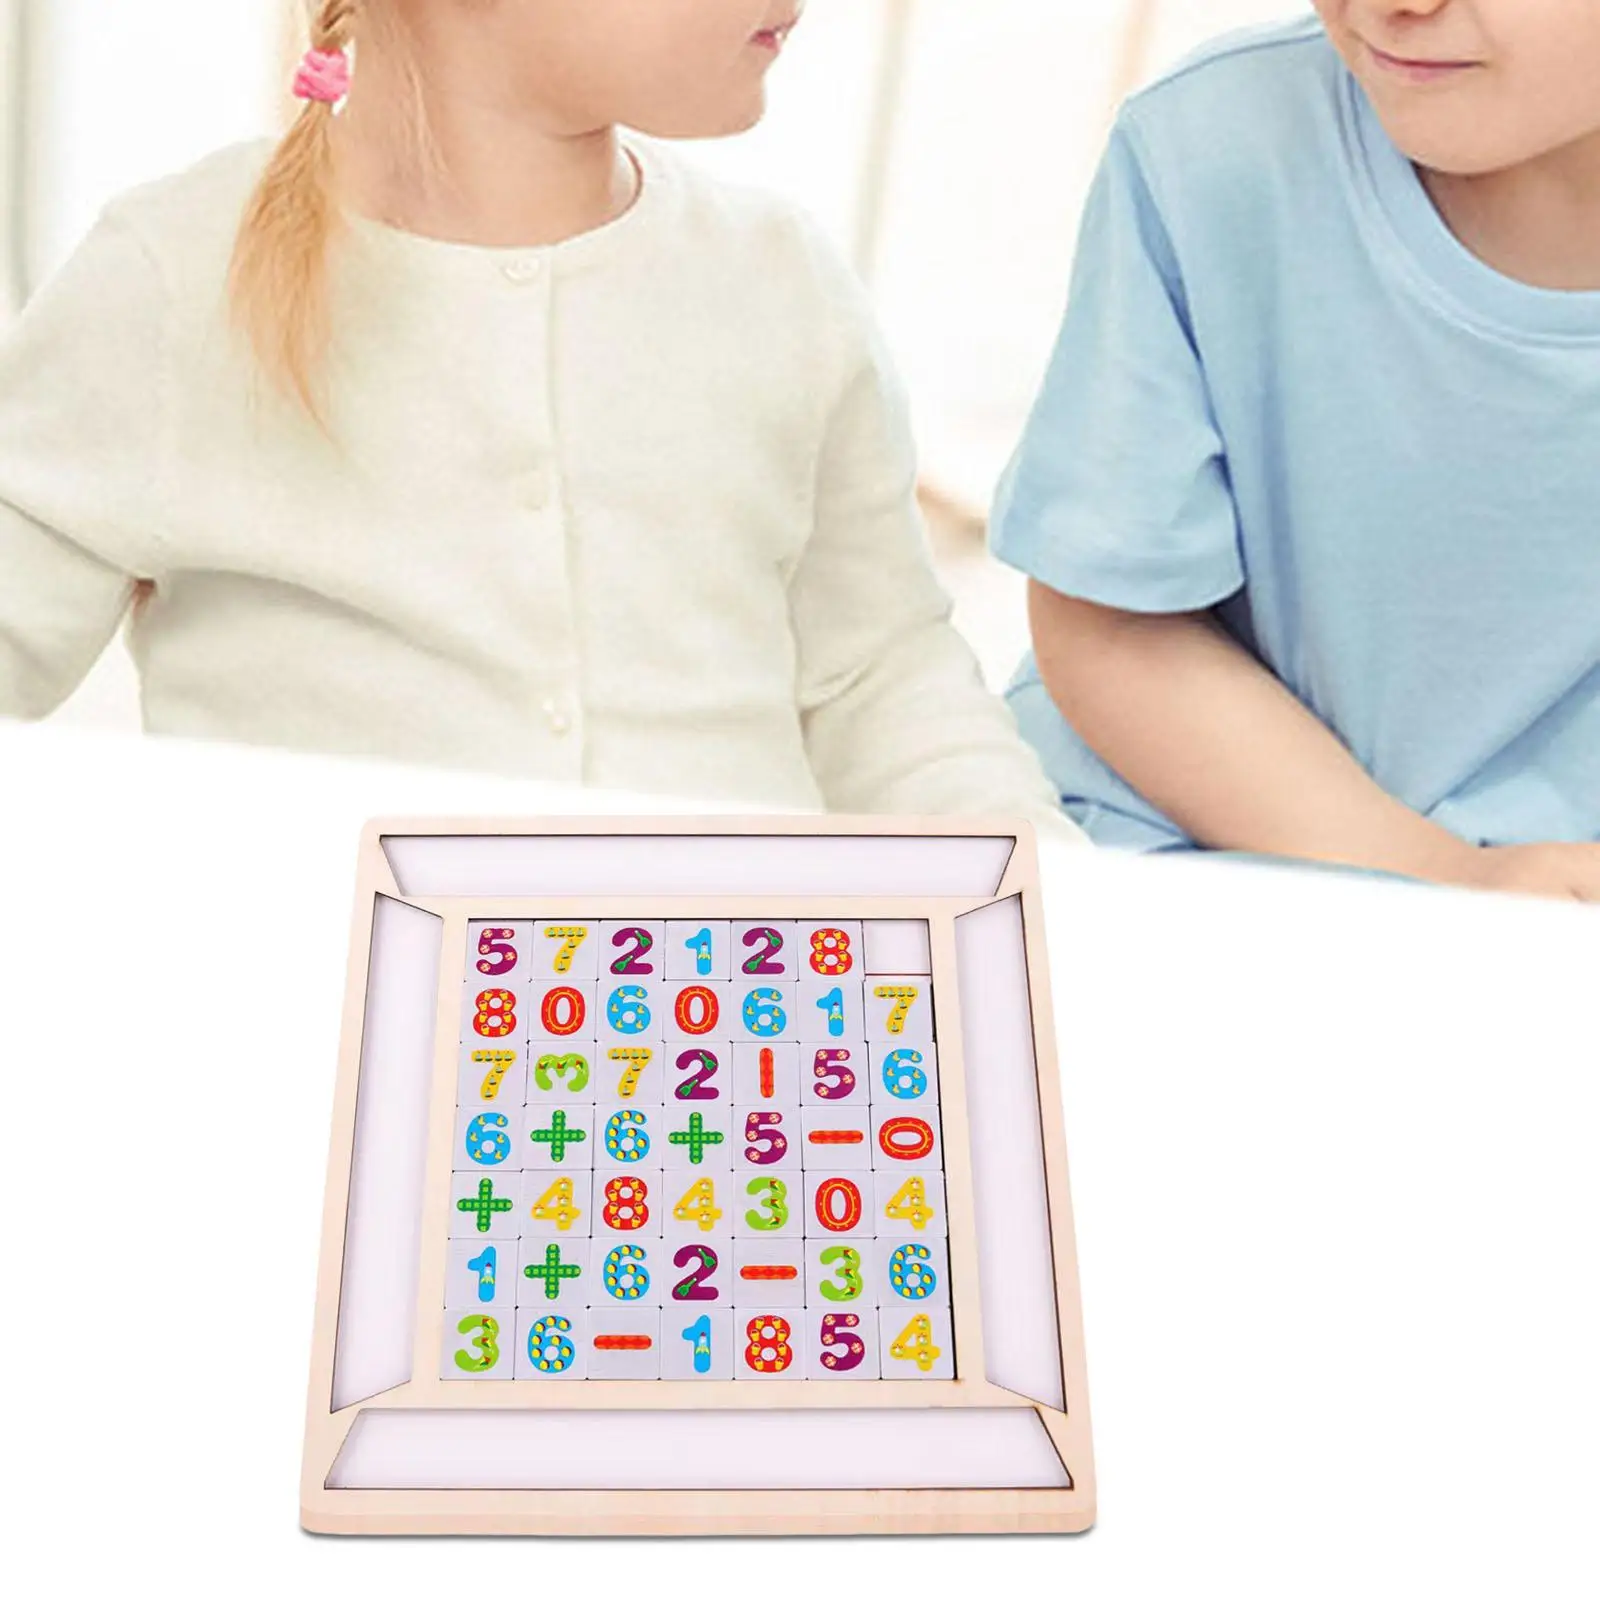 Children Matching Game Blocks toy Matching Parent Child Interactive Tabletop Game Puzzles Wooden Board Game for Preschool